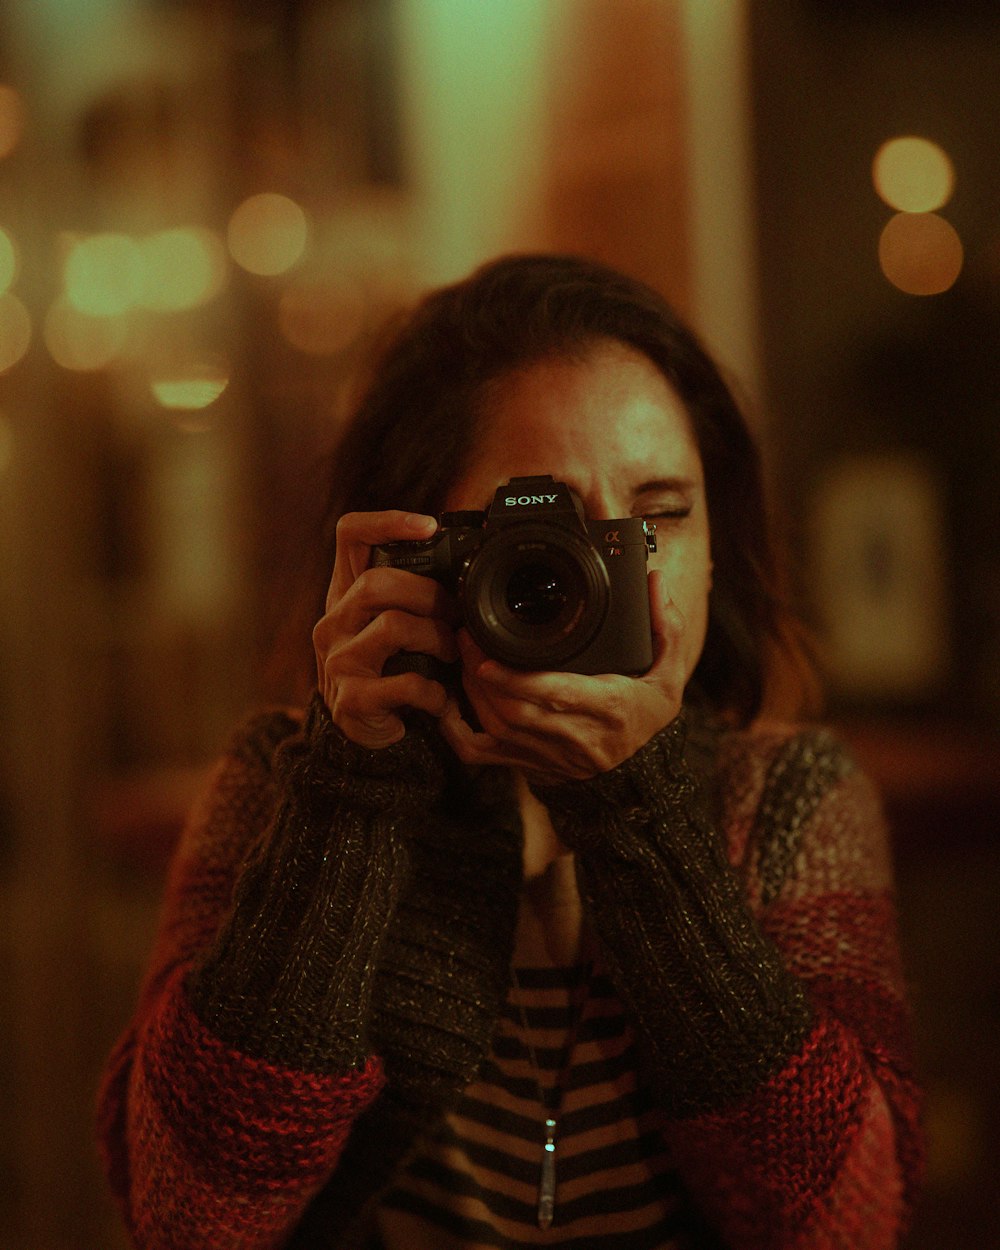 a woman taking a picture of herself with a camera